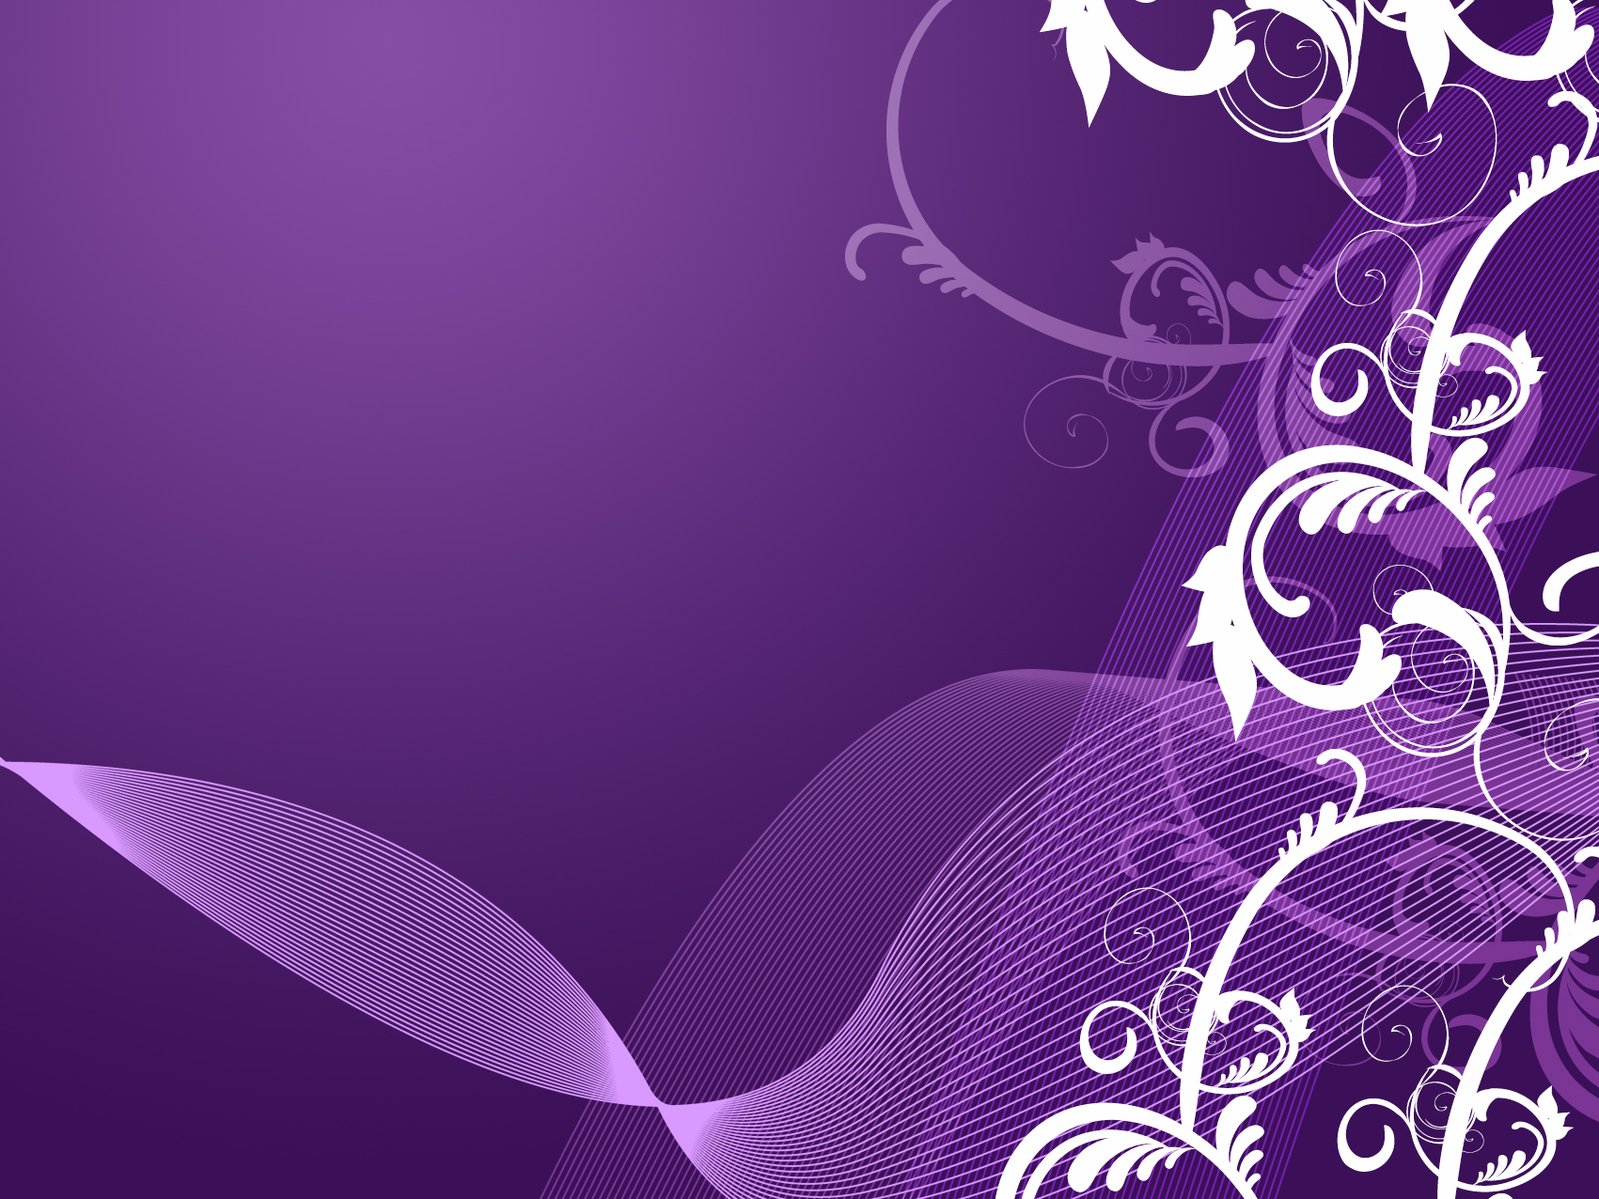 the background with purple swirls on a purple background